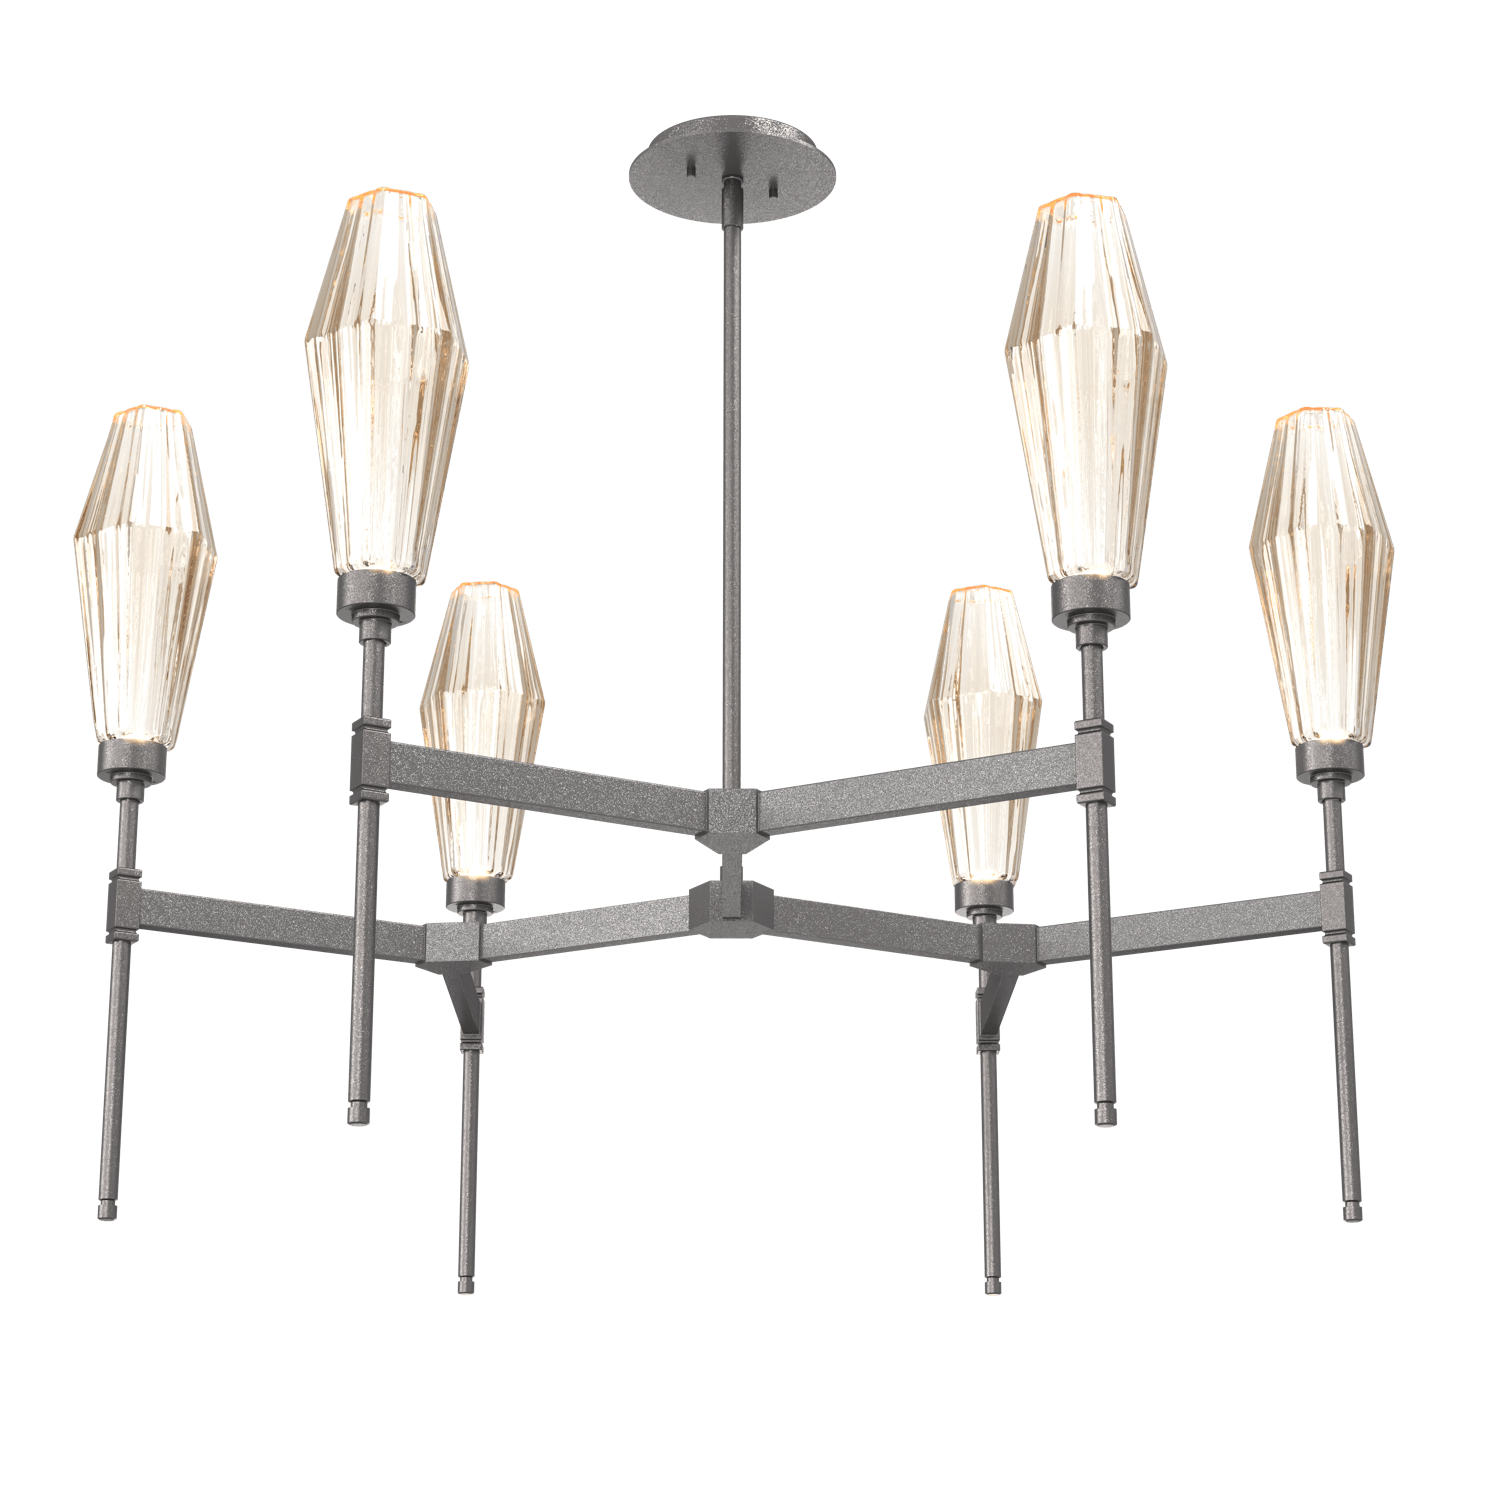 CHB0049-37-GP-RA-Hammerton-Studio-Aalto-37-inch-round-belvedere-chandelier-with-graphite-finish-and-optic-ribbed-amber-glass-shades-and-LED-lamping